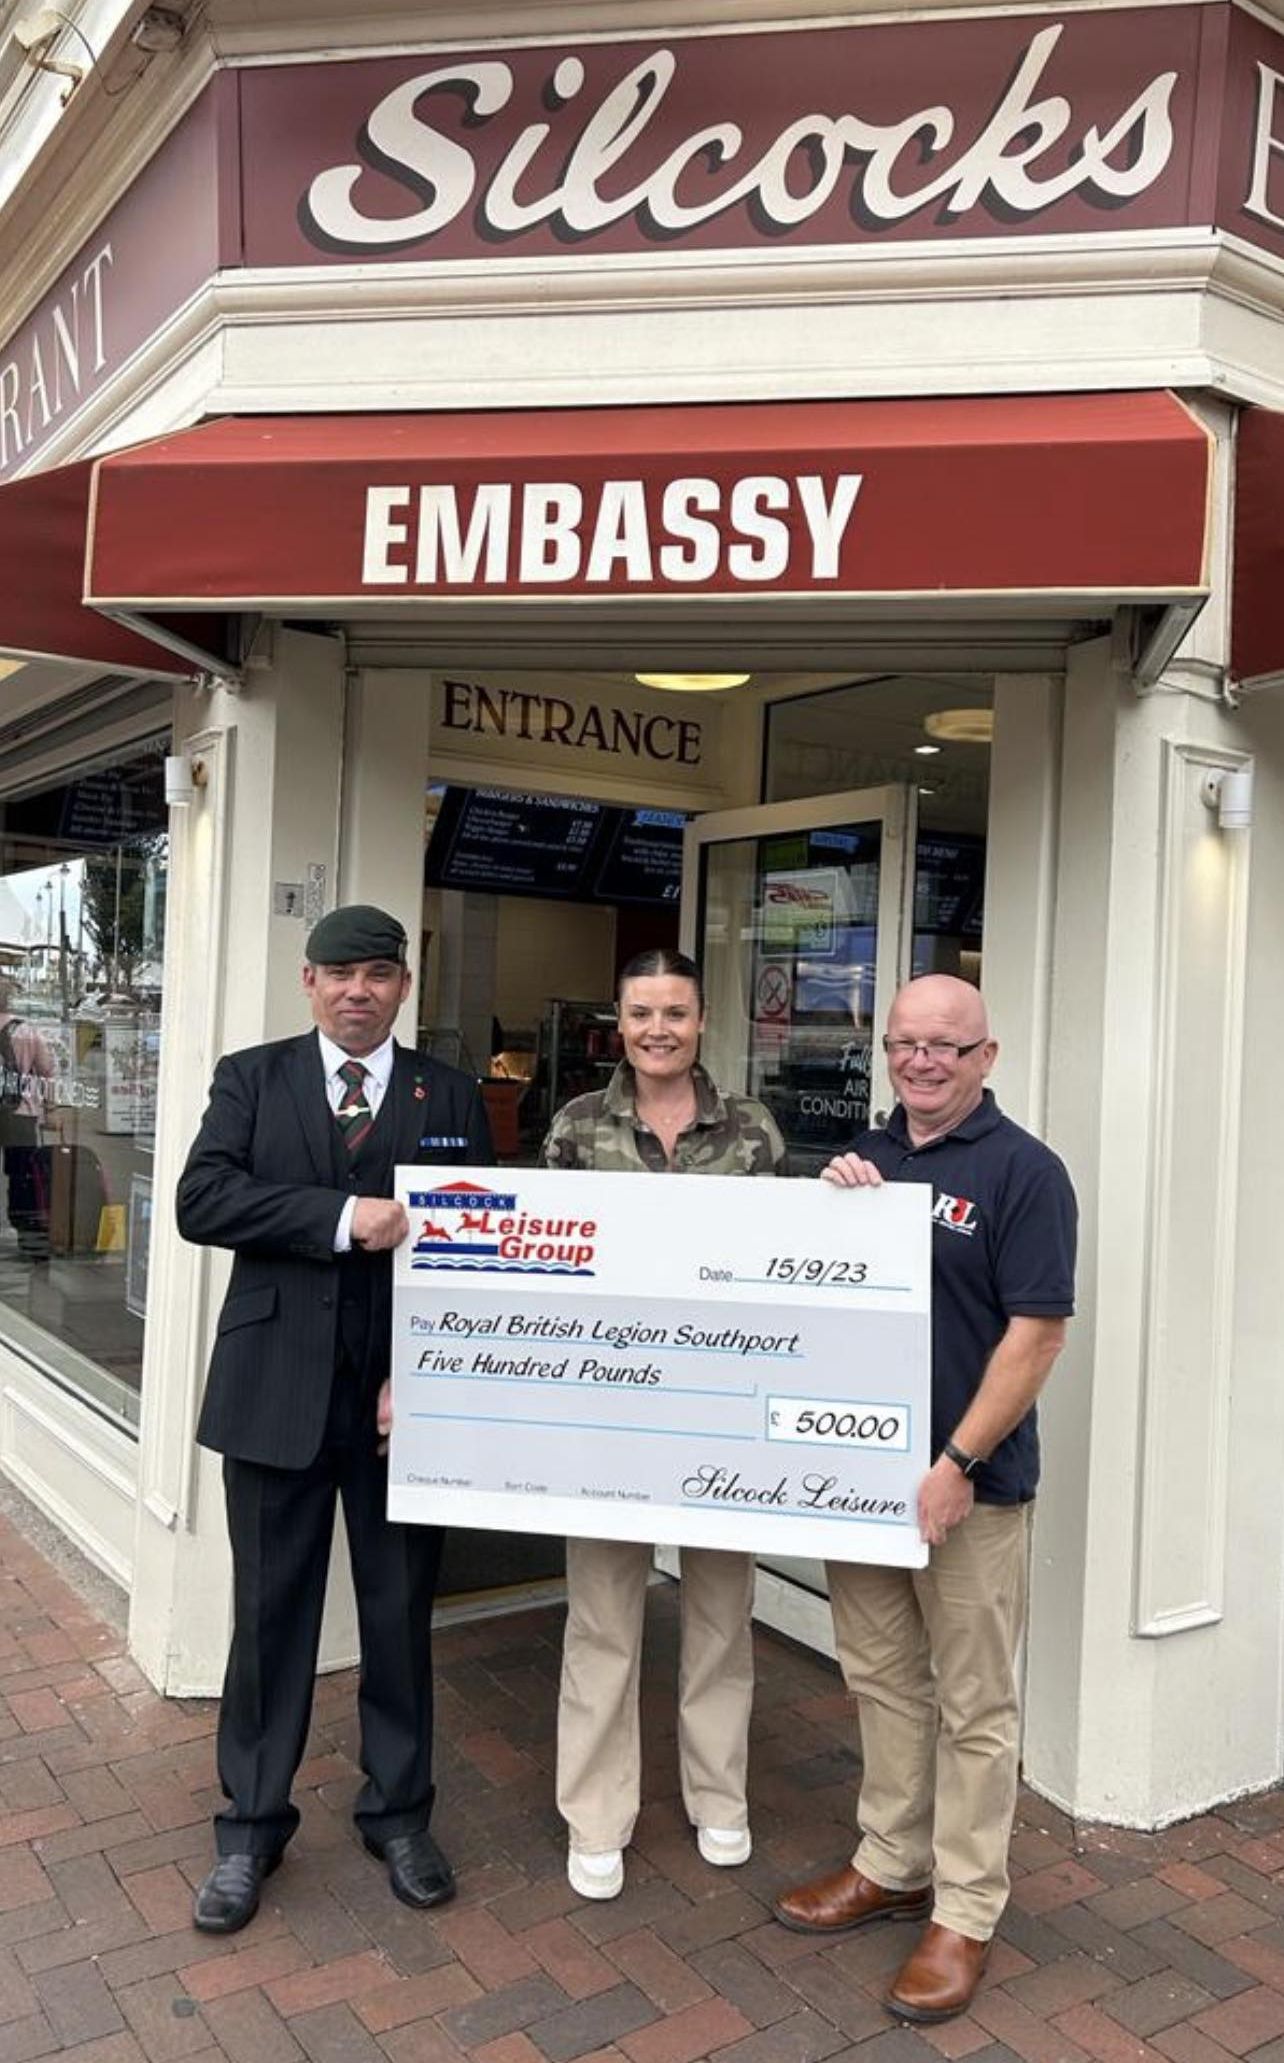 The Silcock's Embassy restaurant in Southport has donated £500 to Southport Royal British Legion ahead of the royal visit by Princess Anne to rededidate Southport War Memorial. Andy Prescott, who served in the 2nd Battalion Royal Green Jackets between 1999 and 2004, presented the cheque to Major Nick McEntee and Sarah McEntee from Southport Royal British Legion